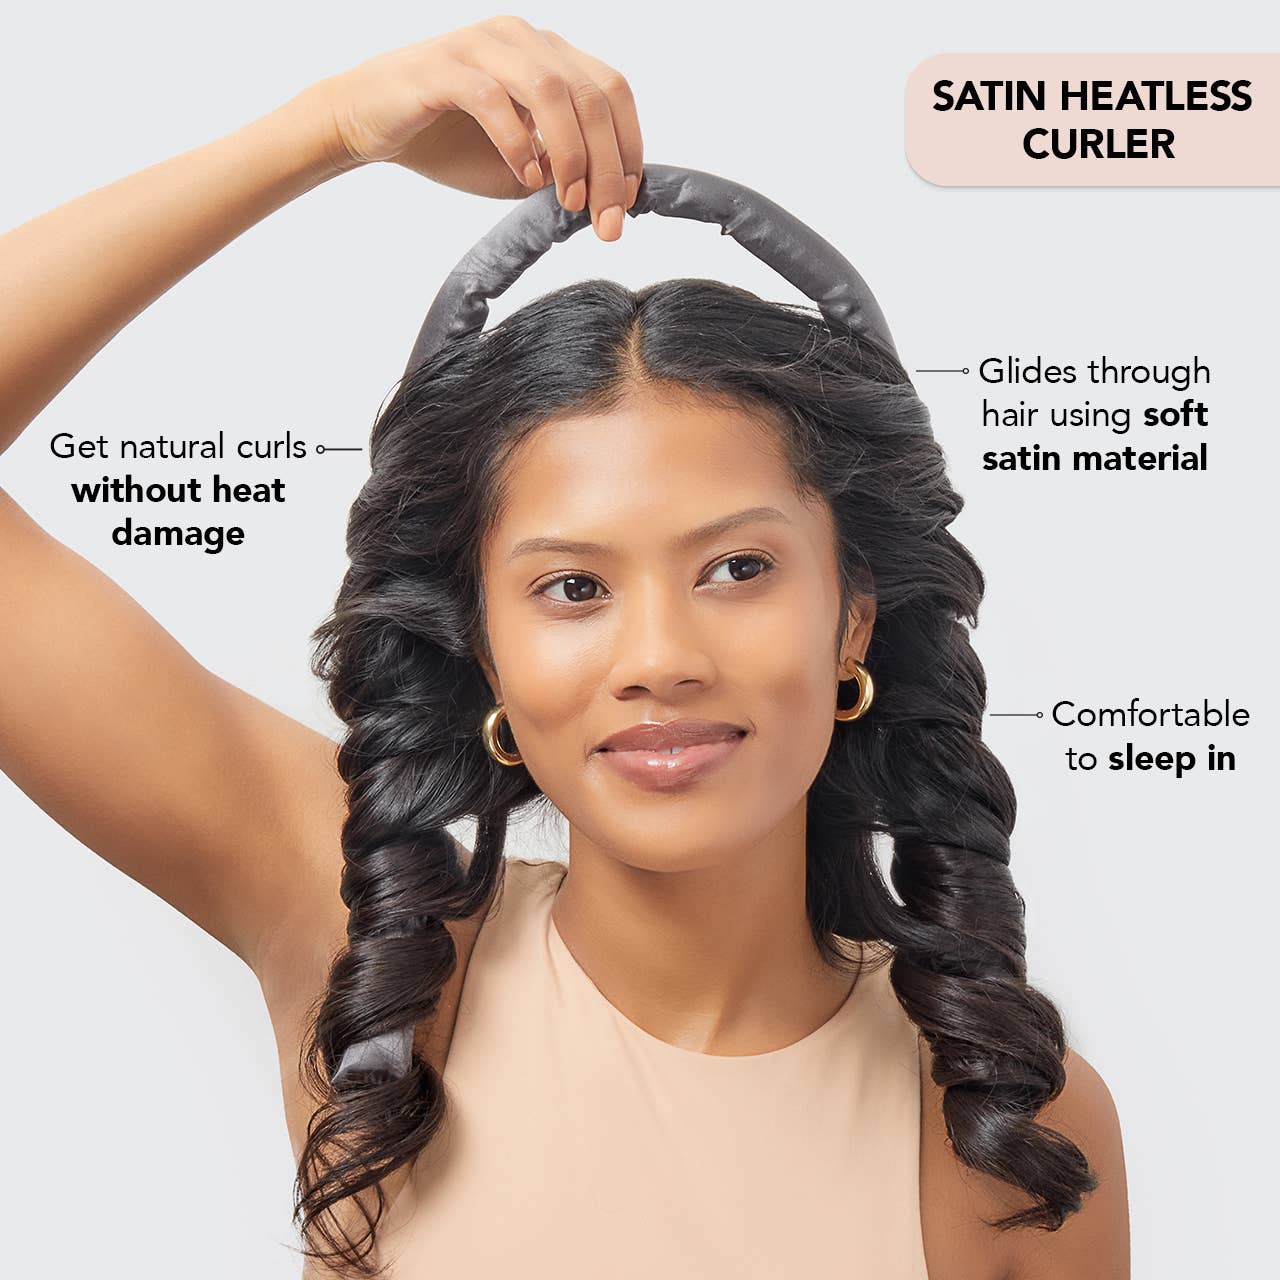 Satin Heatless Curling Set - Charcoal by KITSCH